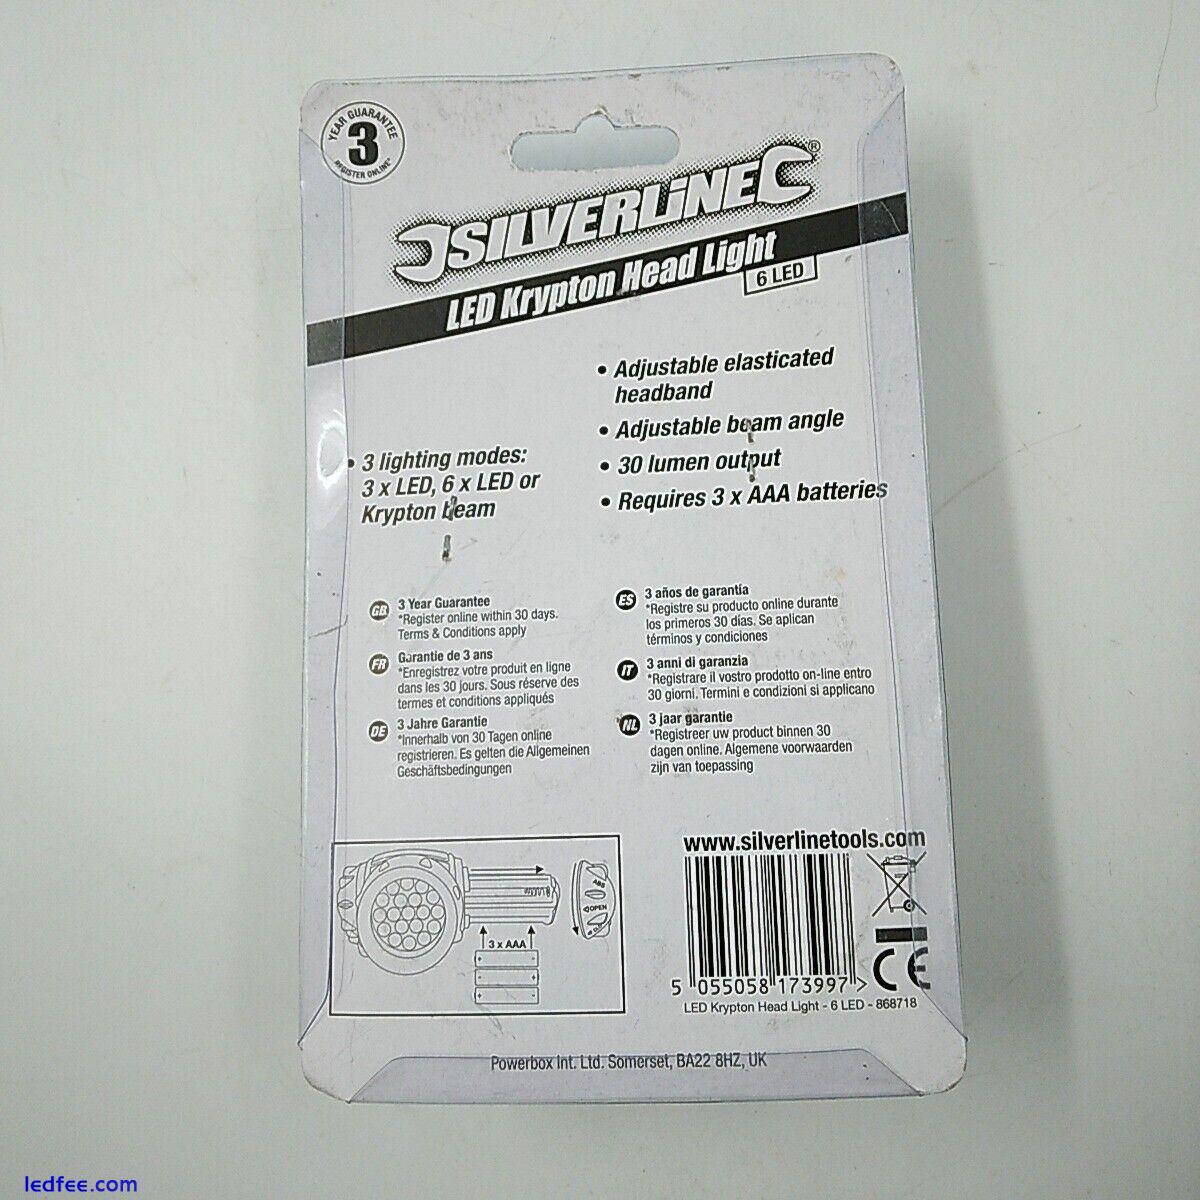 Silverline 6 LED Krypton Head Light Head Torches - New/Sealed Batteries Included 3 